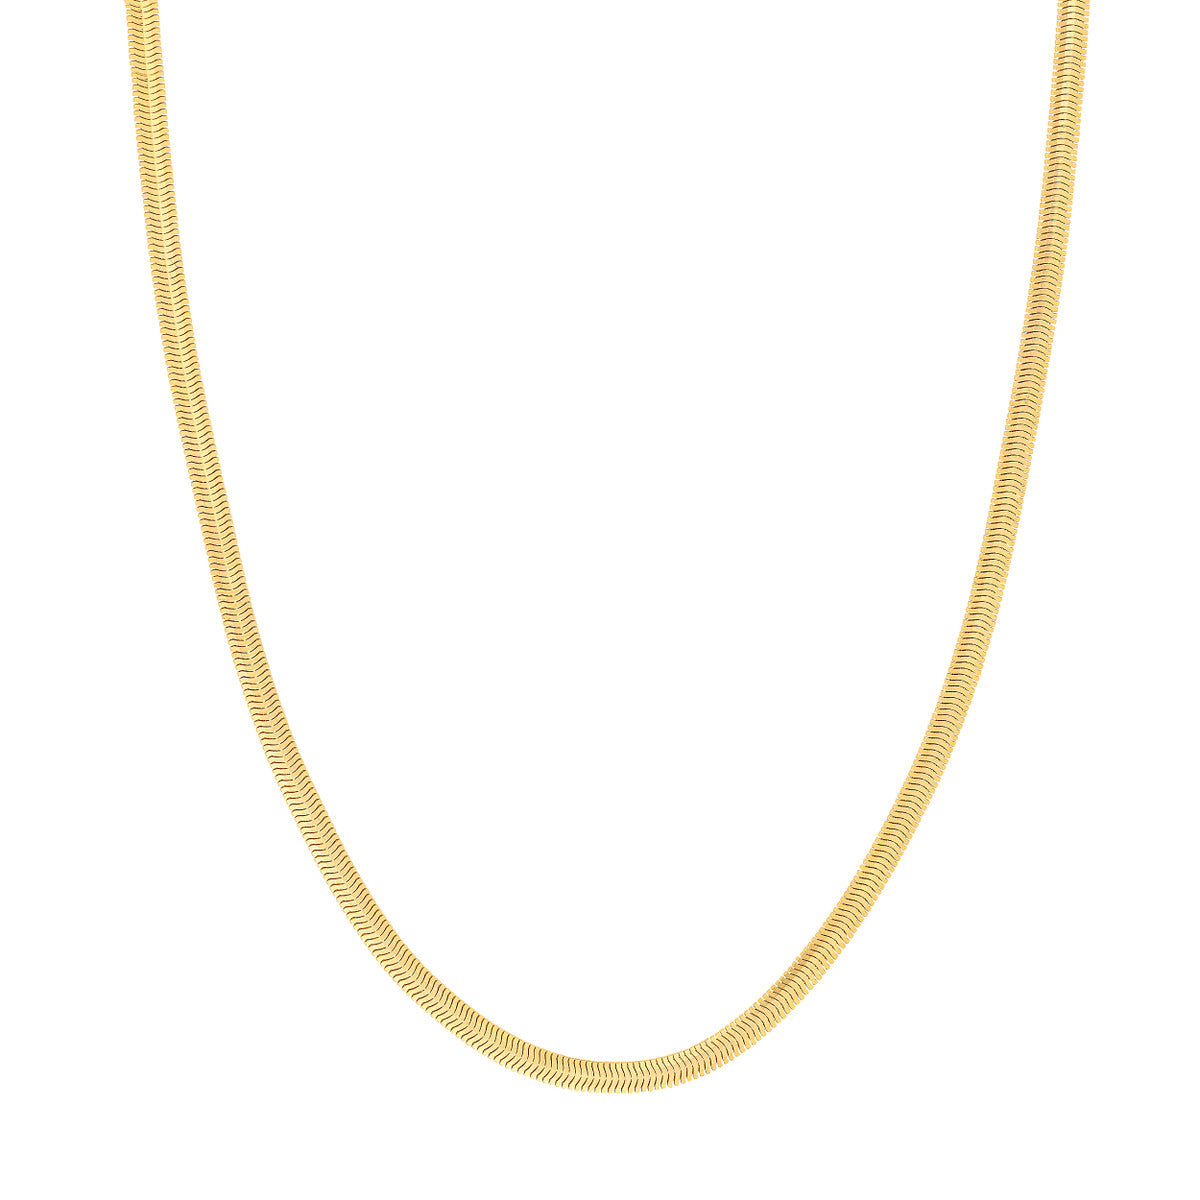 14K Gold 4.2mm Light Oval Snake Chain Necklace with Lobster Lock